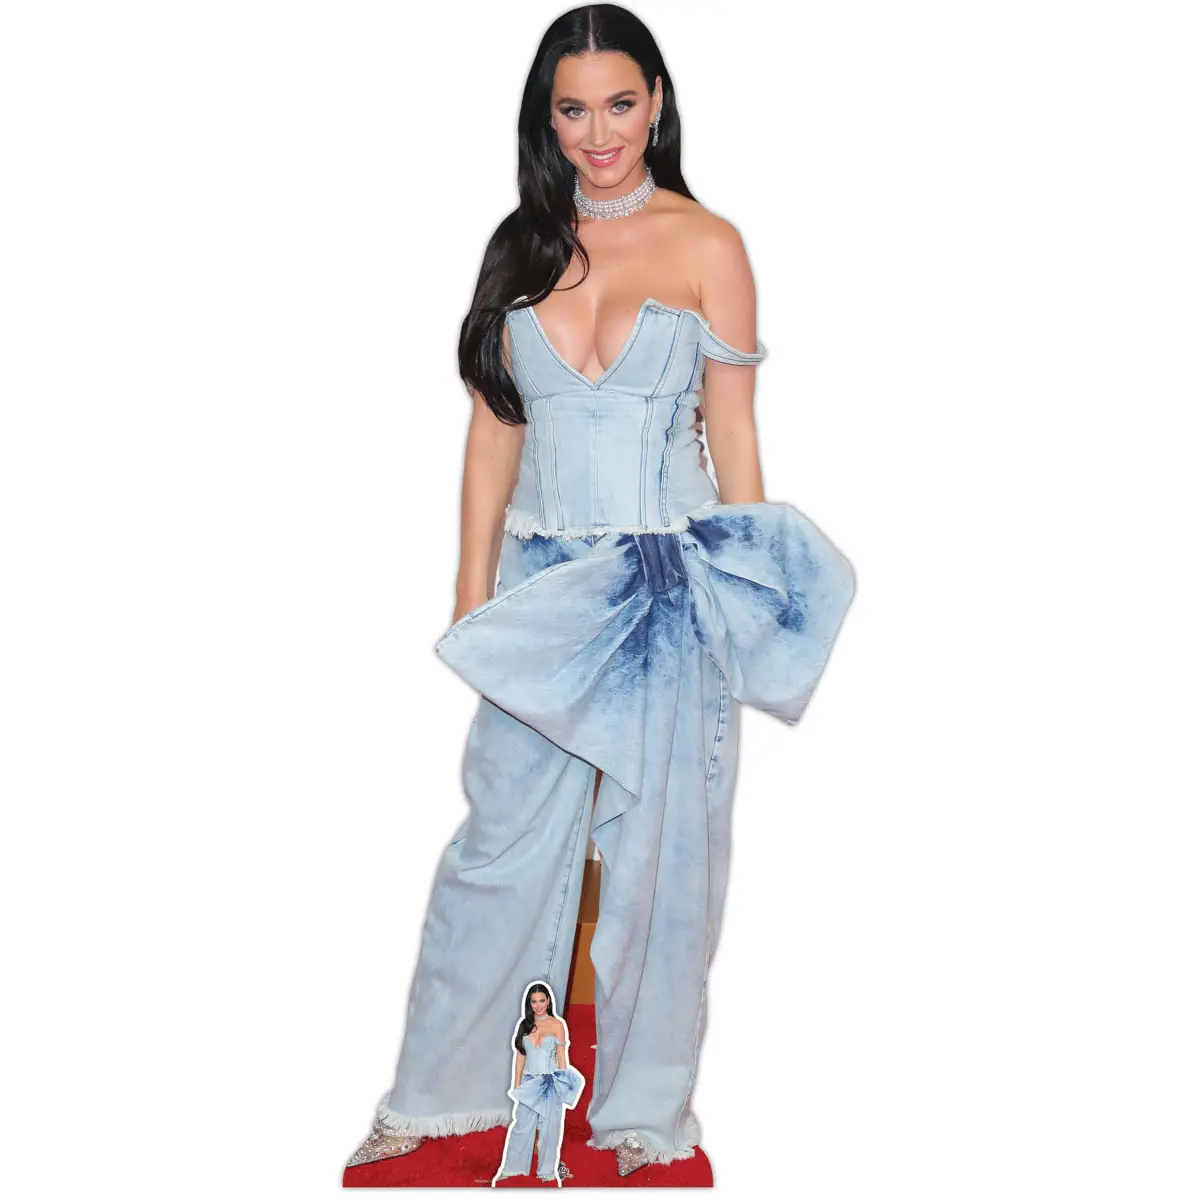 Katy Perry American Singer Songwriter Lifesize + Mini Cardboard Cutout Front